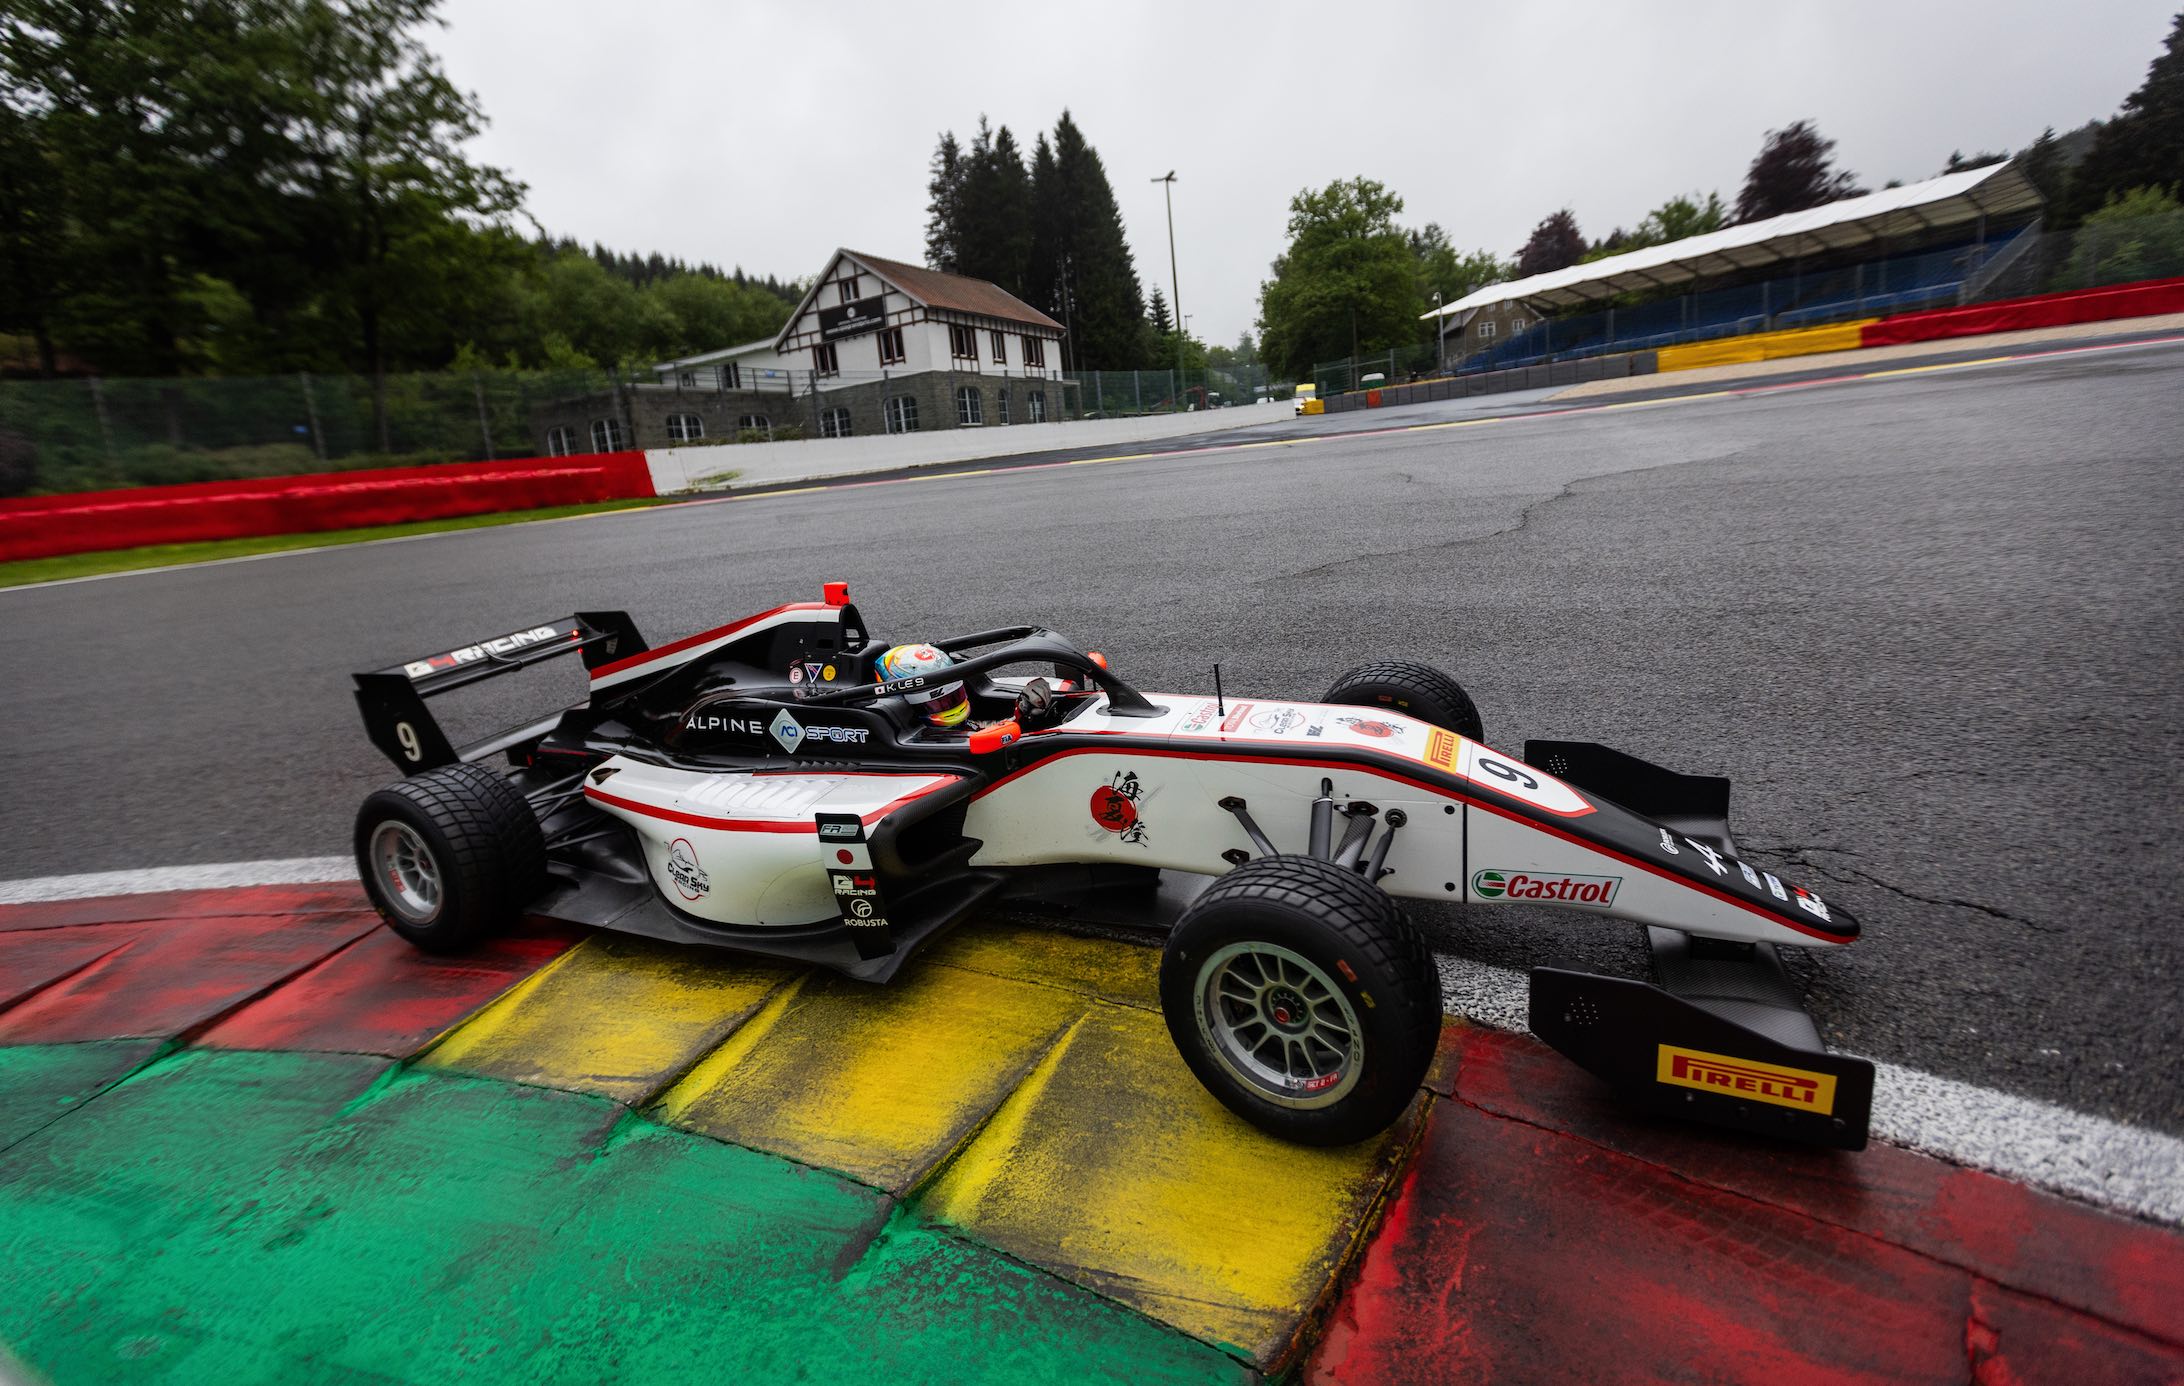 G4 Racing completes tough Spa-Francorchamps weekend